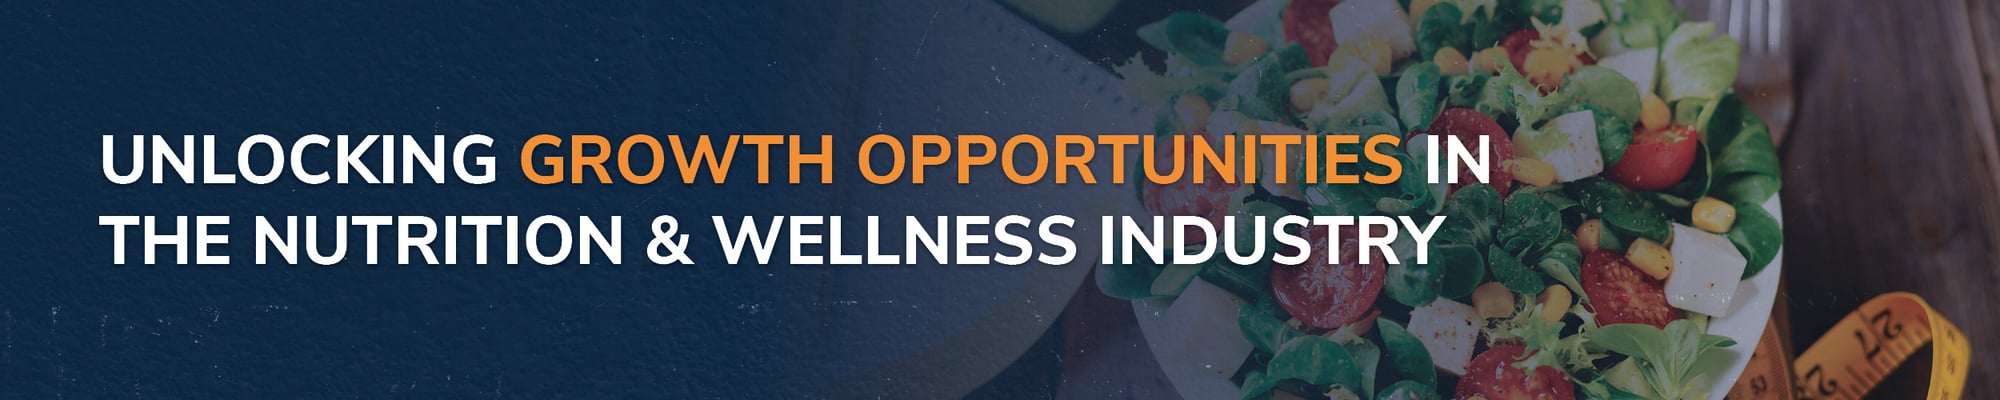 Unlocking Growth Opportunities in the Nutrition & Wellness Industry